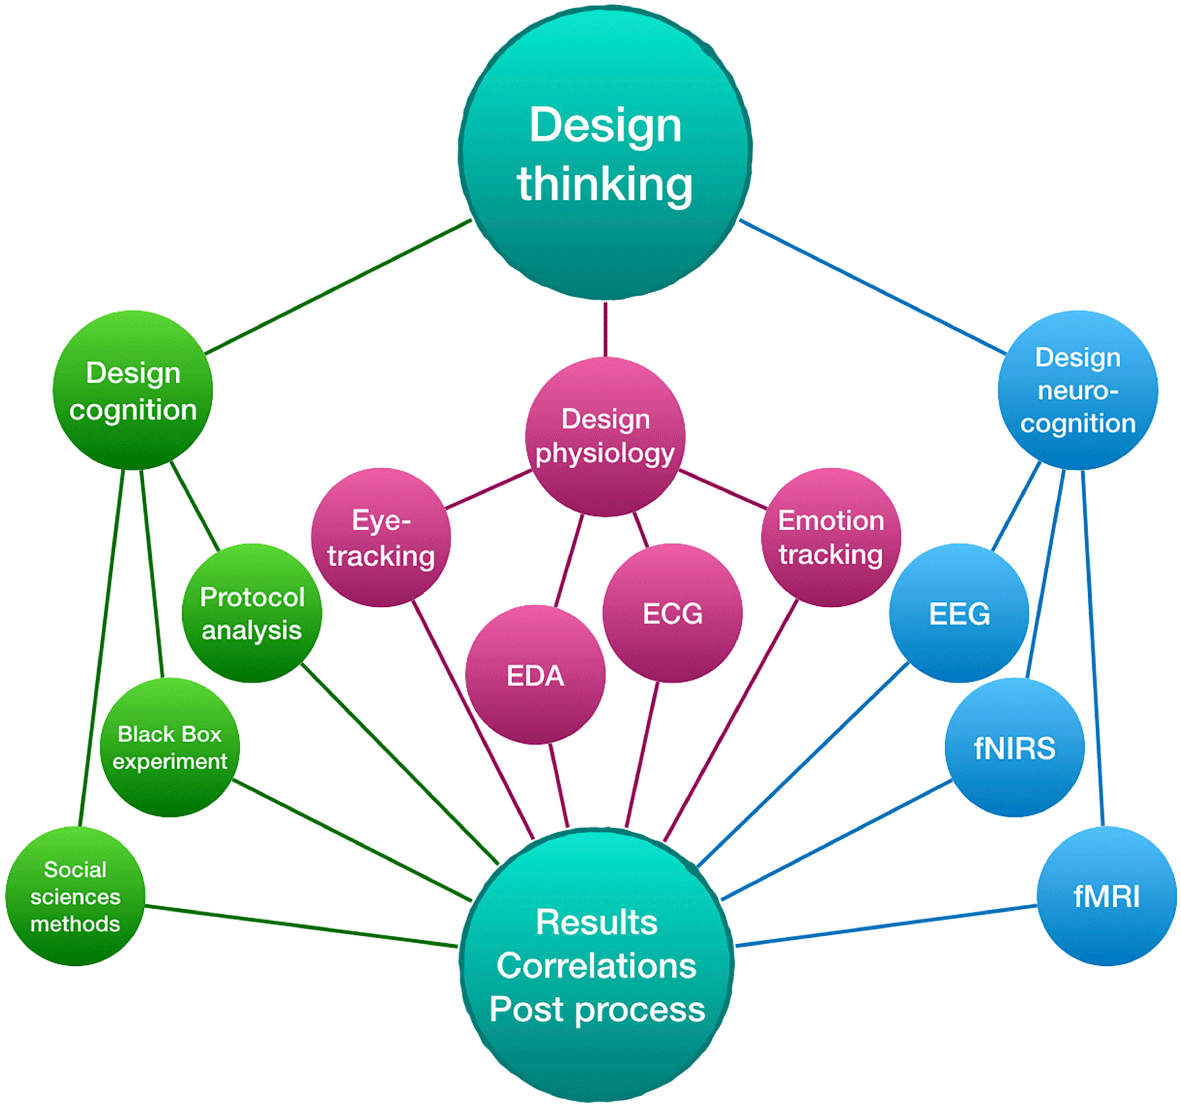 primary secondary and tertiary research in design thinking